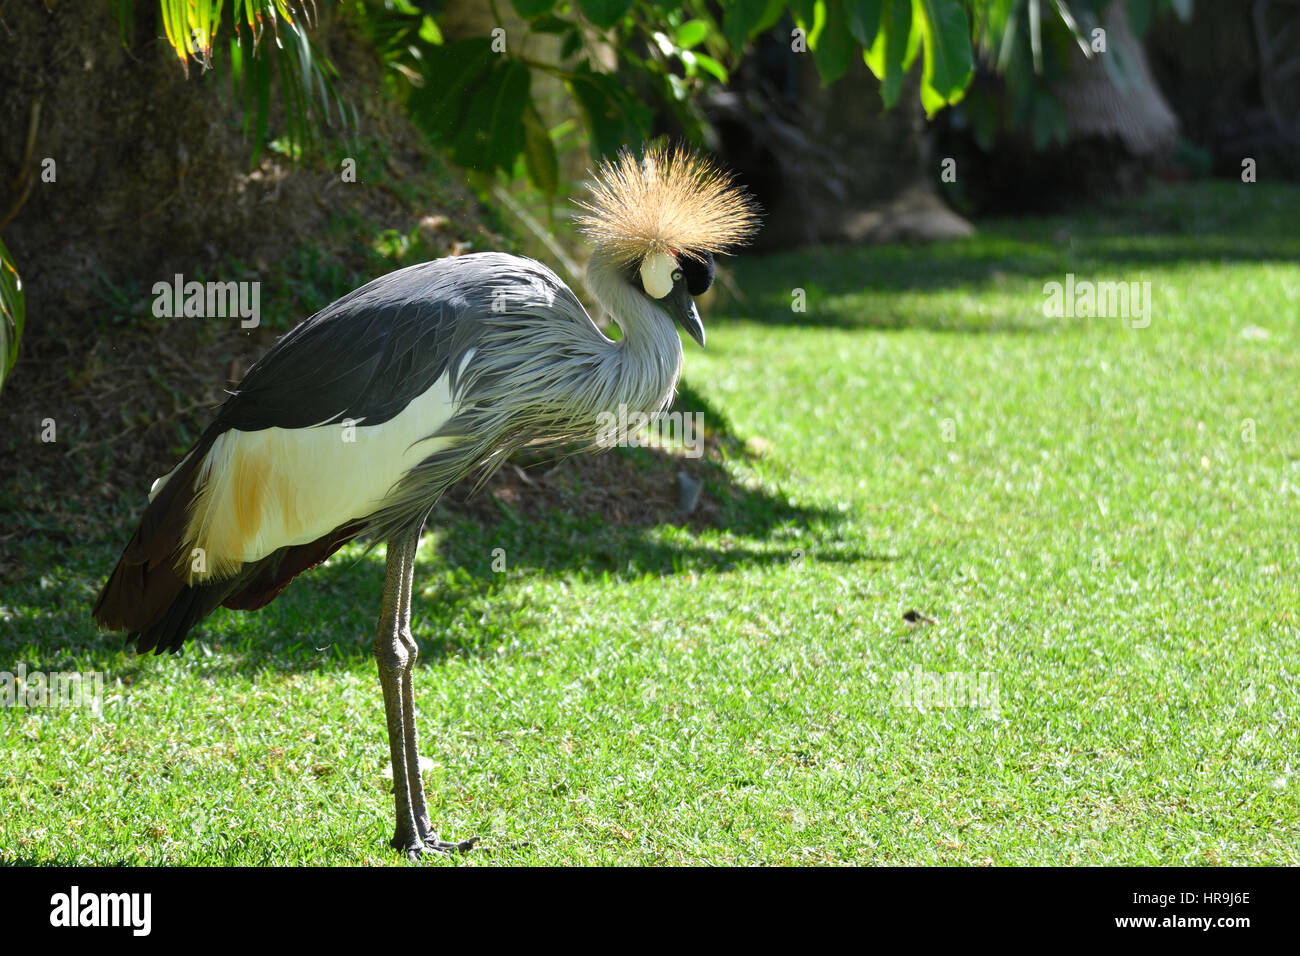 Crowned Crane (Balearica regulorum) standing on the grass with sun in the crown, picture from park in Puerto de la Cruz Tenerife Spain. Stock Photo